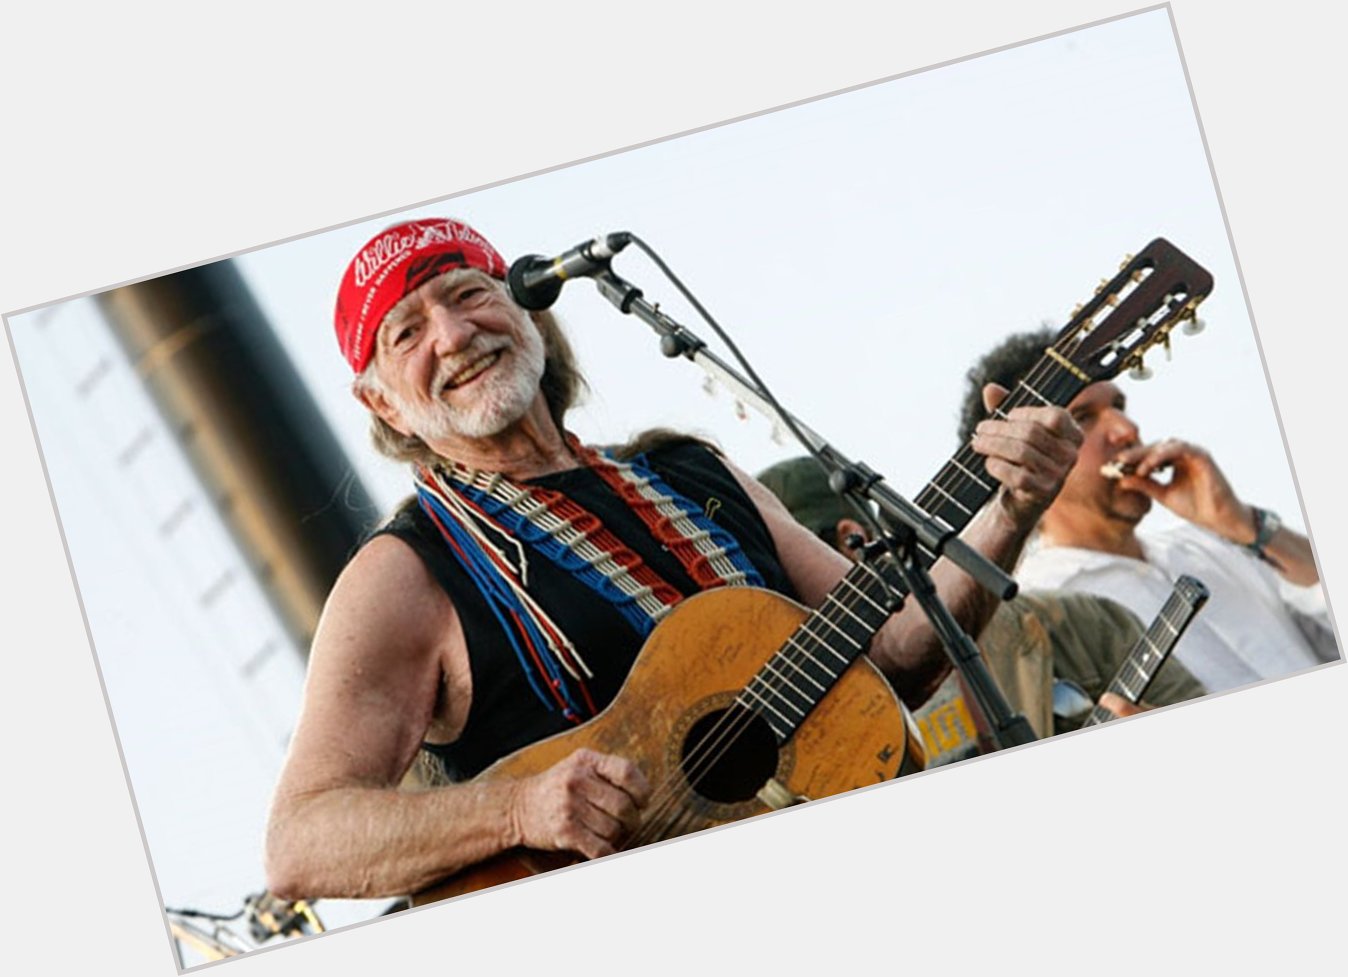 Happy Birthday to the legend, Willie Nelson!

Can\t wait to welcome you to town for Hall of Fame Weekend. 